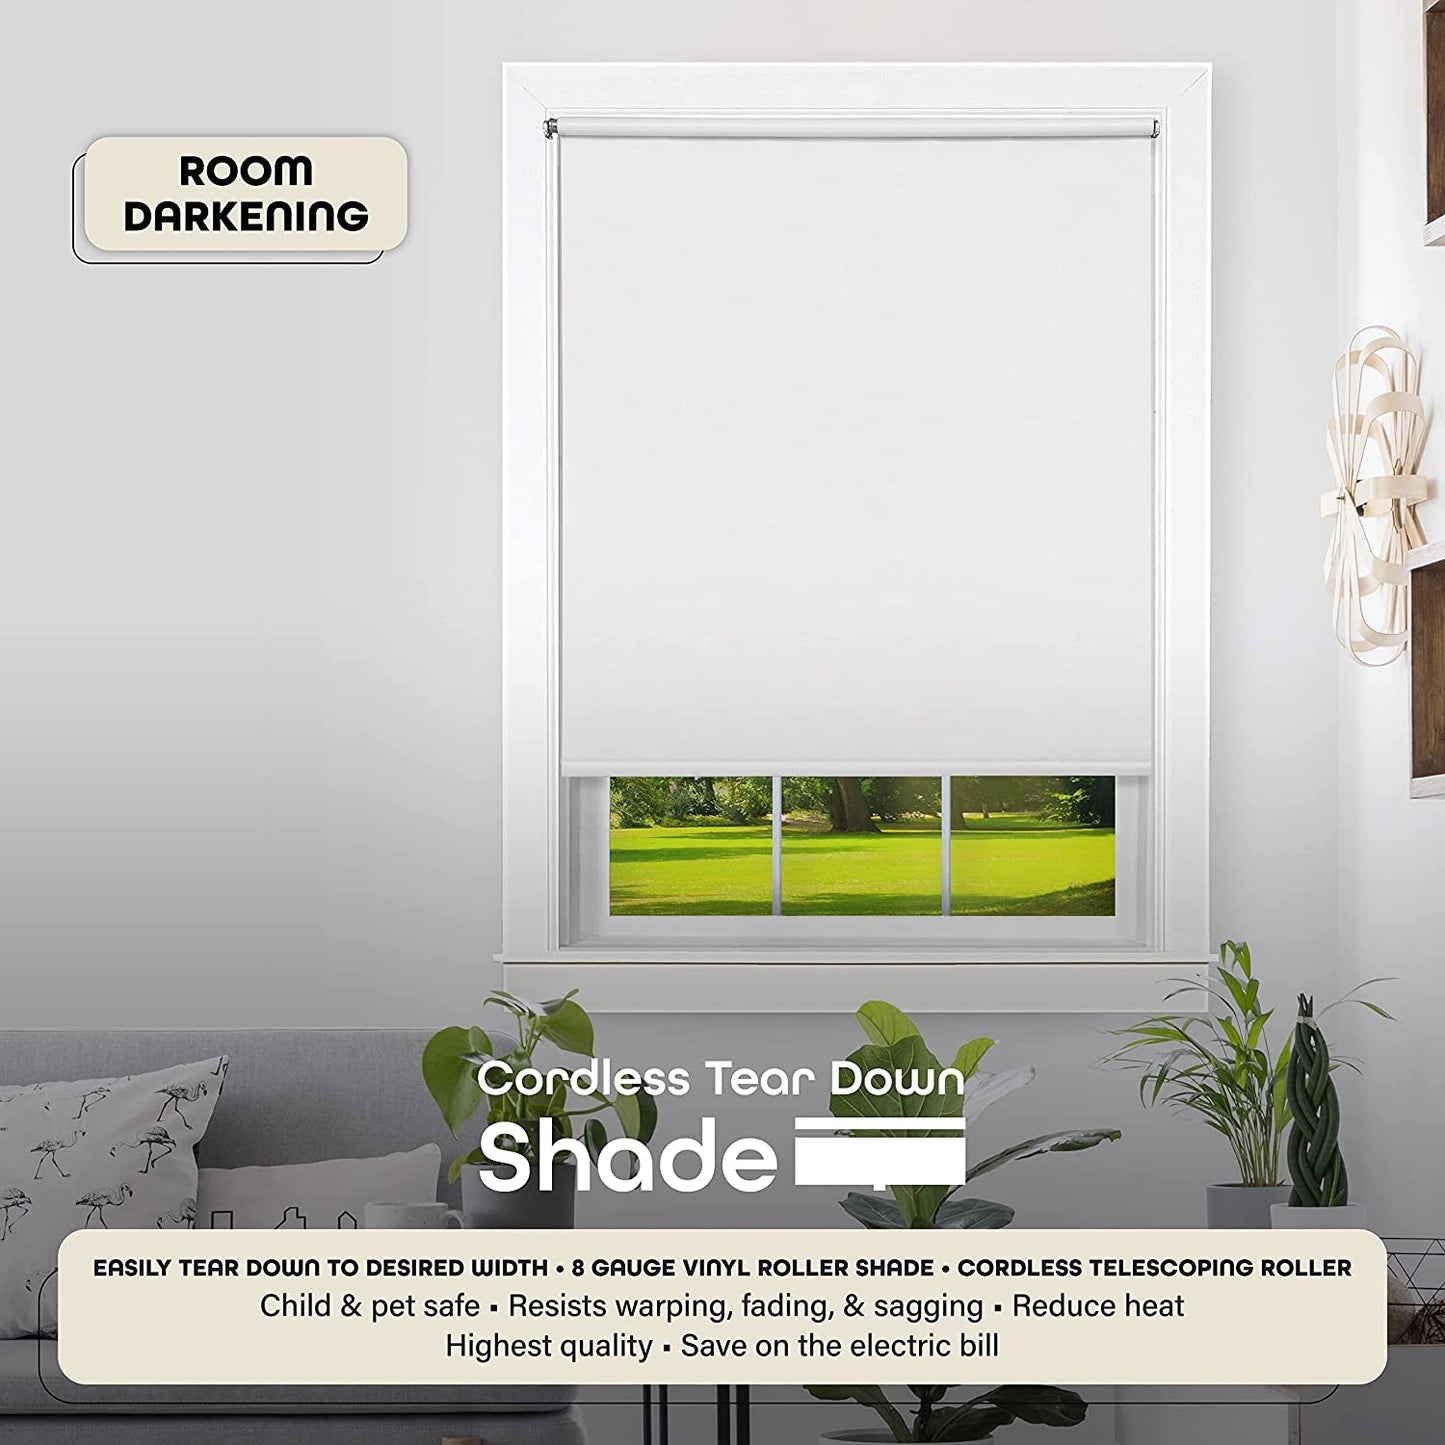 Cordless Tear down Room Darkening Shade - 37 Inch Width, 72 Inch Length - White - Cord-Free Customizable Light Filtering Horizontal Mini Vinyl Windows Blinds for Interior by Achim Home Decor